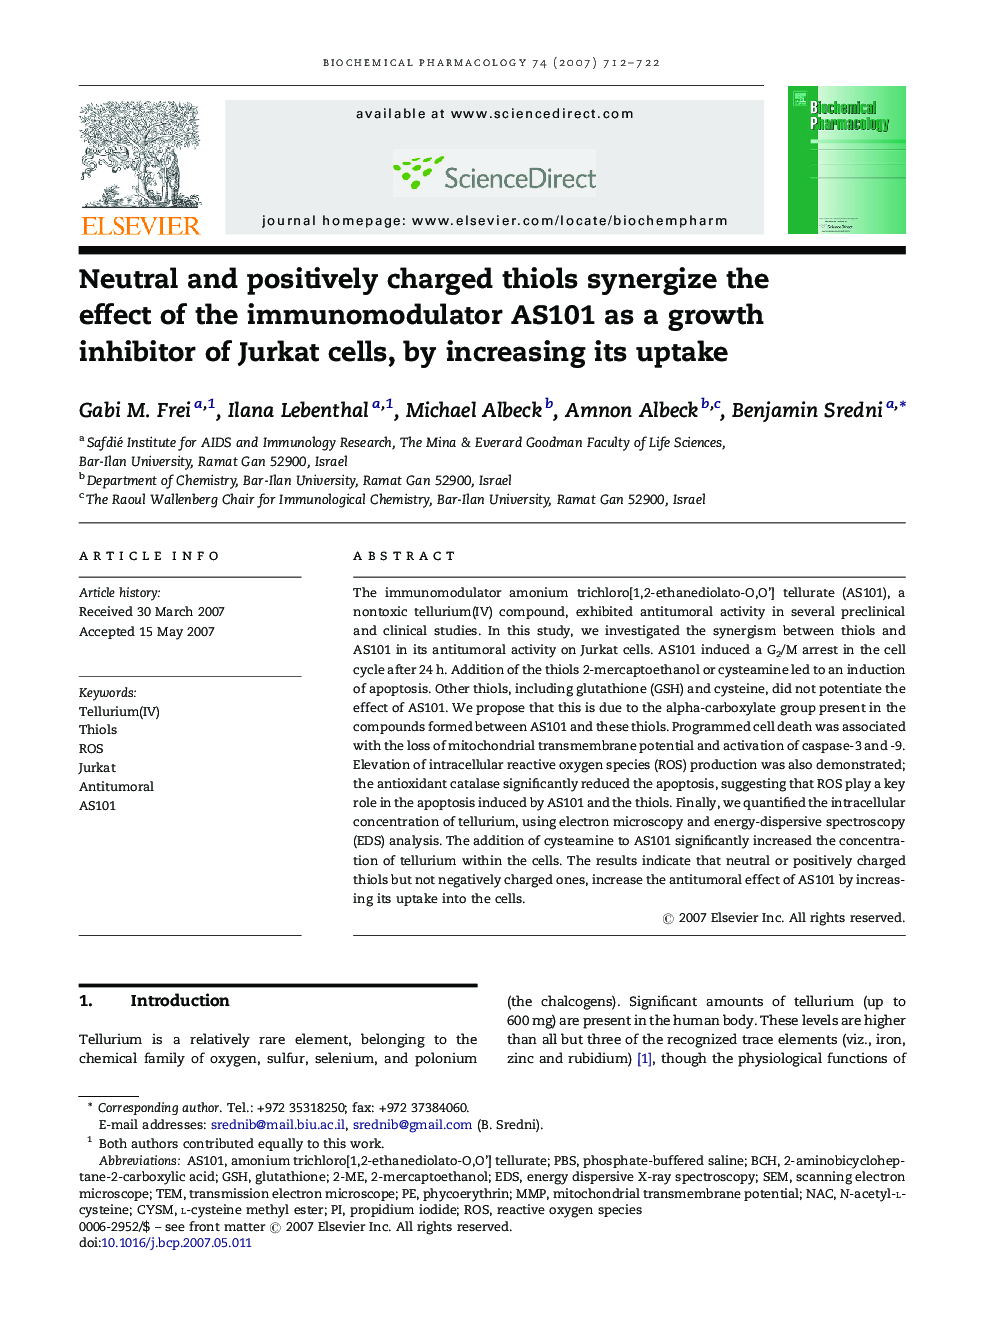 Neutral and positively charged thiols synergize the effect of the immunomodulator AS101 as a growth inhibitor of Jurkat cells, by increasing its uptake